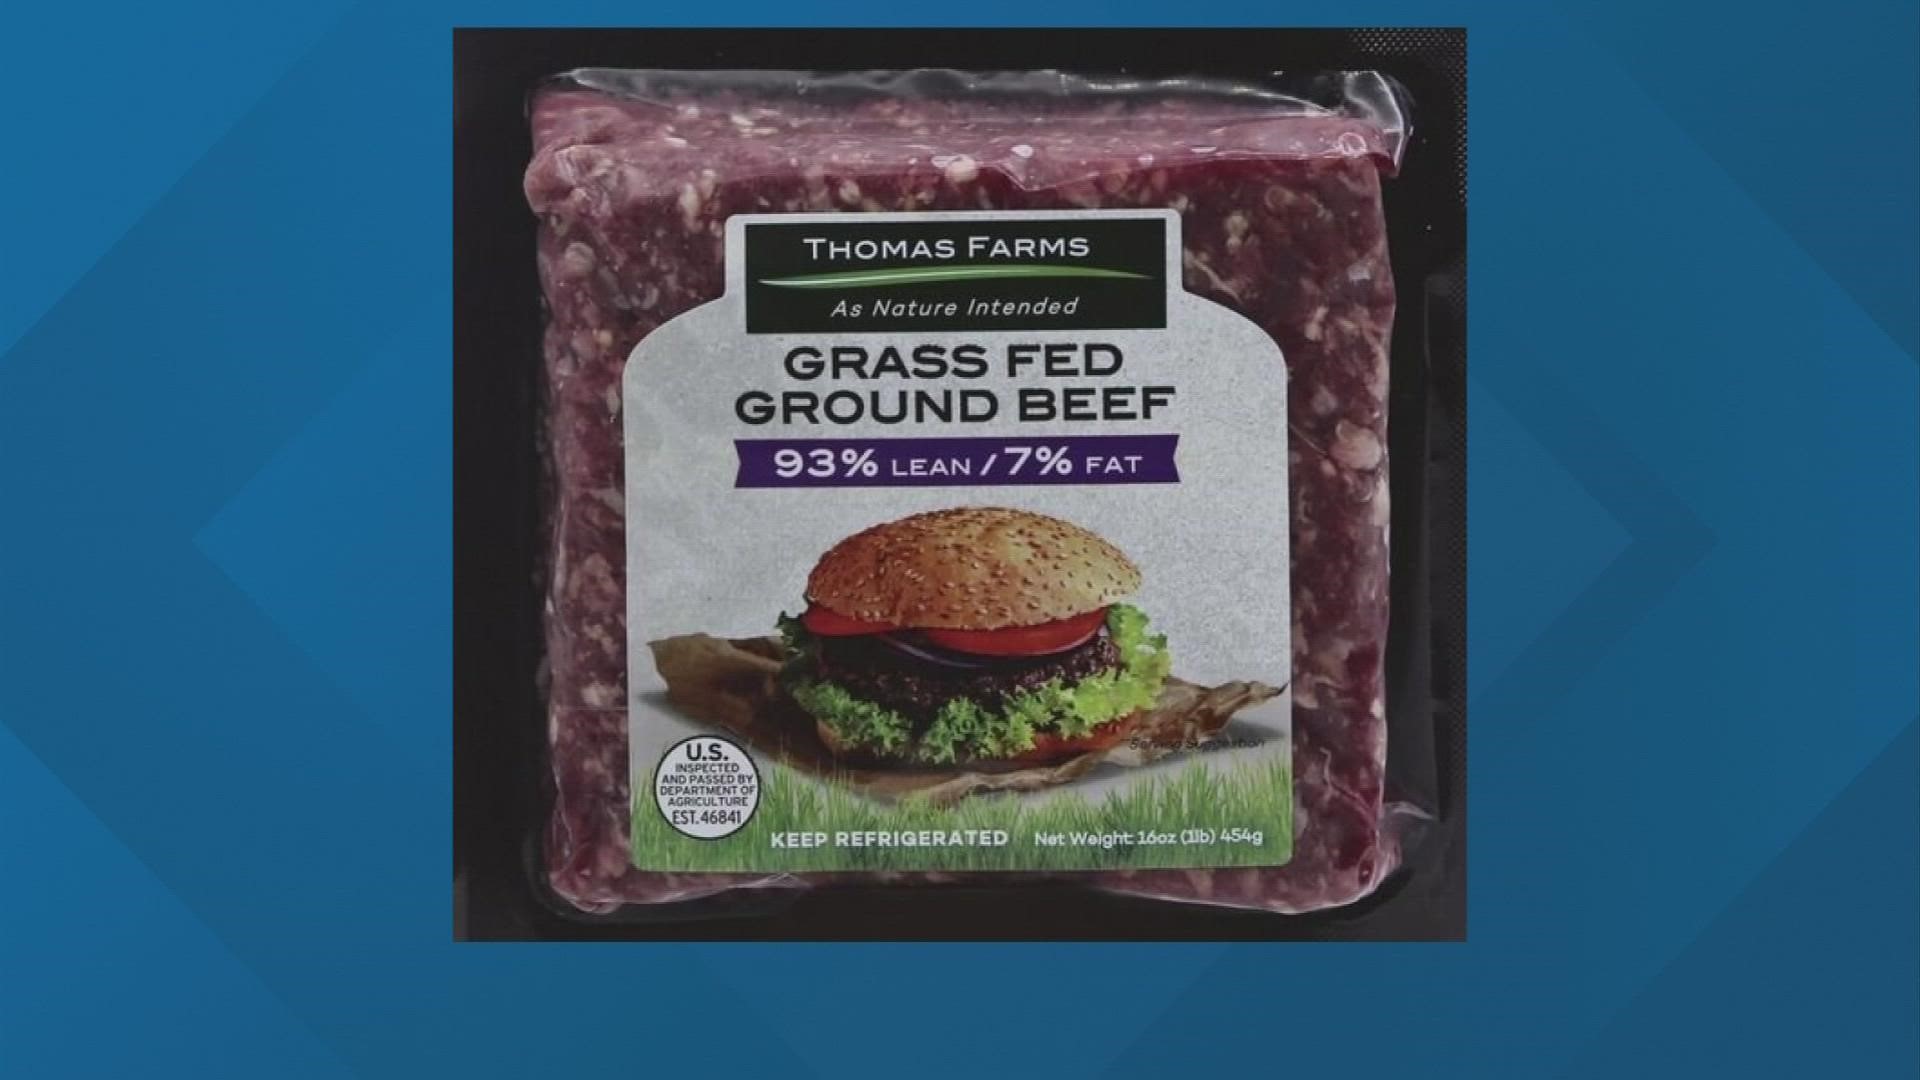 The recall includes ground beef products sold across the U.S. under a number of different brand names.